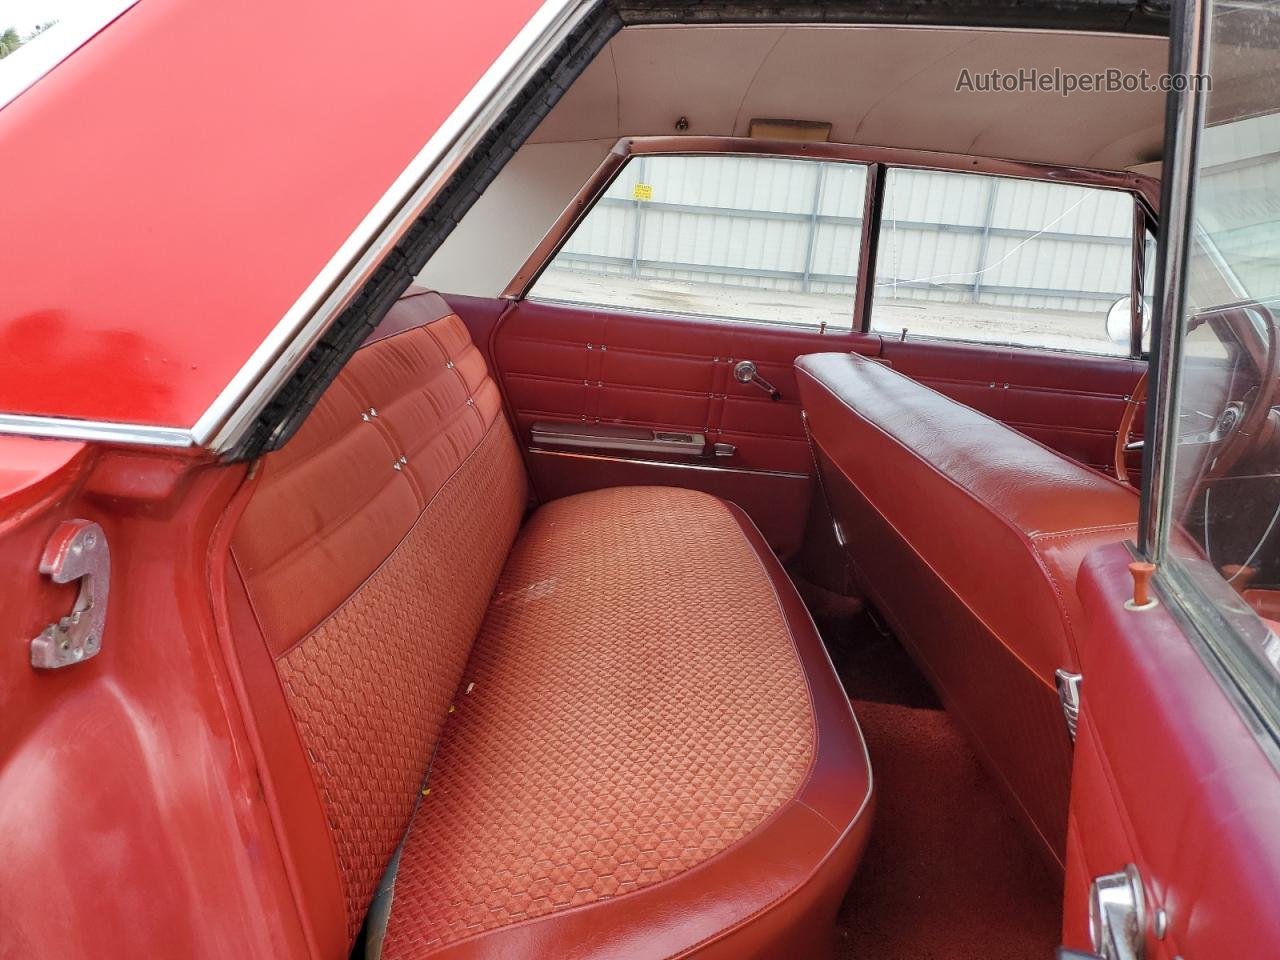 1963 Chevrolet Impala Red vin: 31839A192238